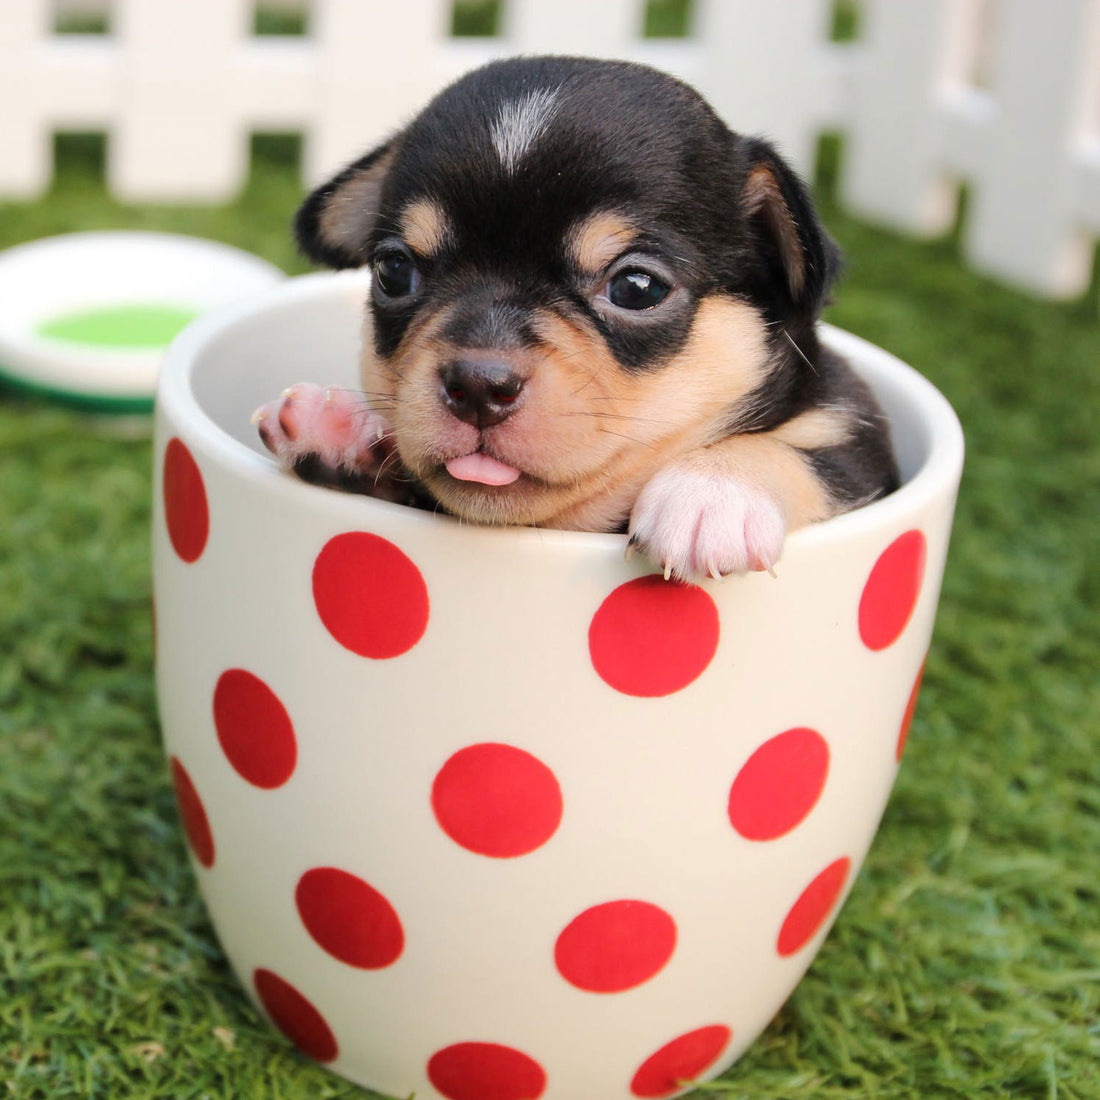 10 Tricks for Training Your New Puppy